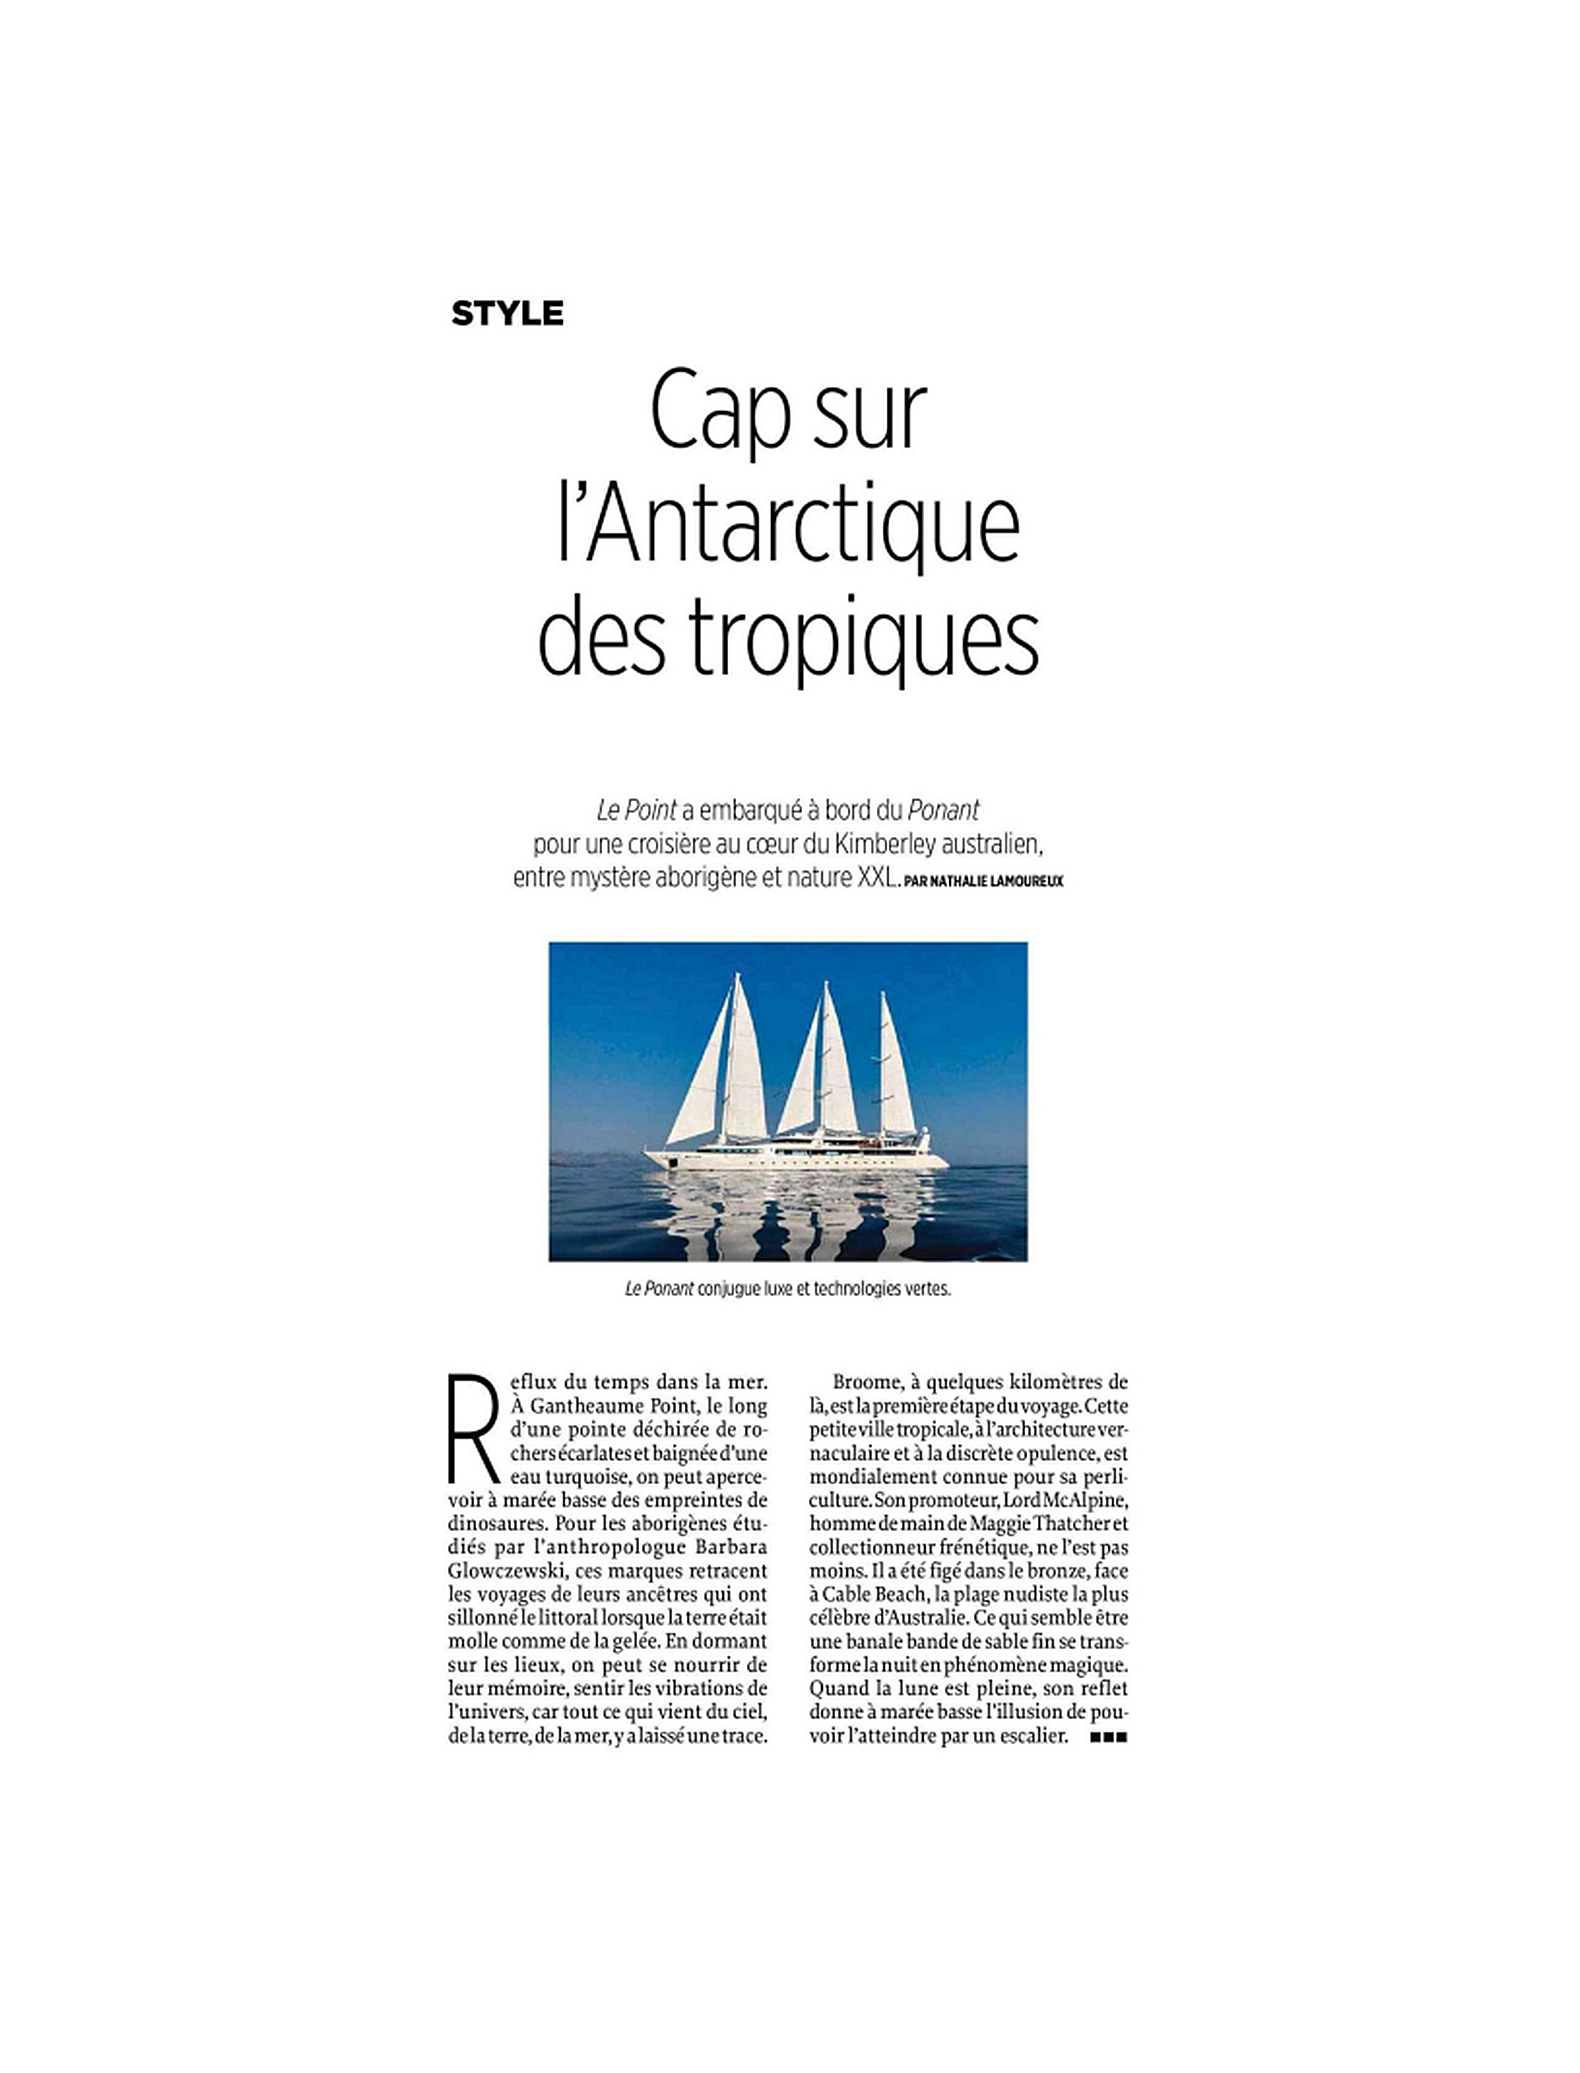 Article by Le Point